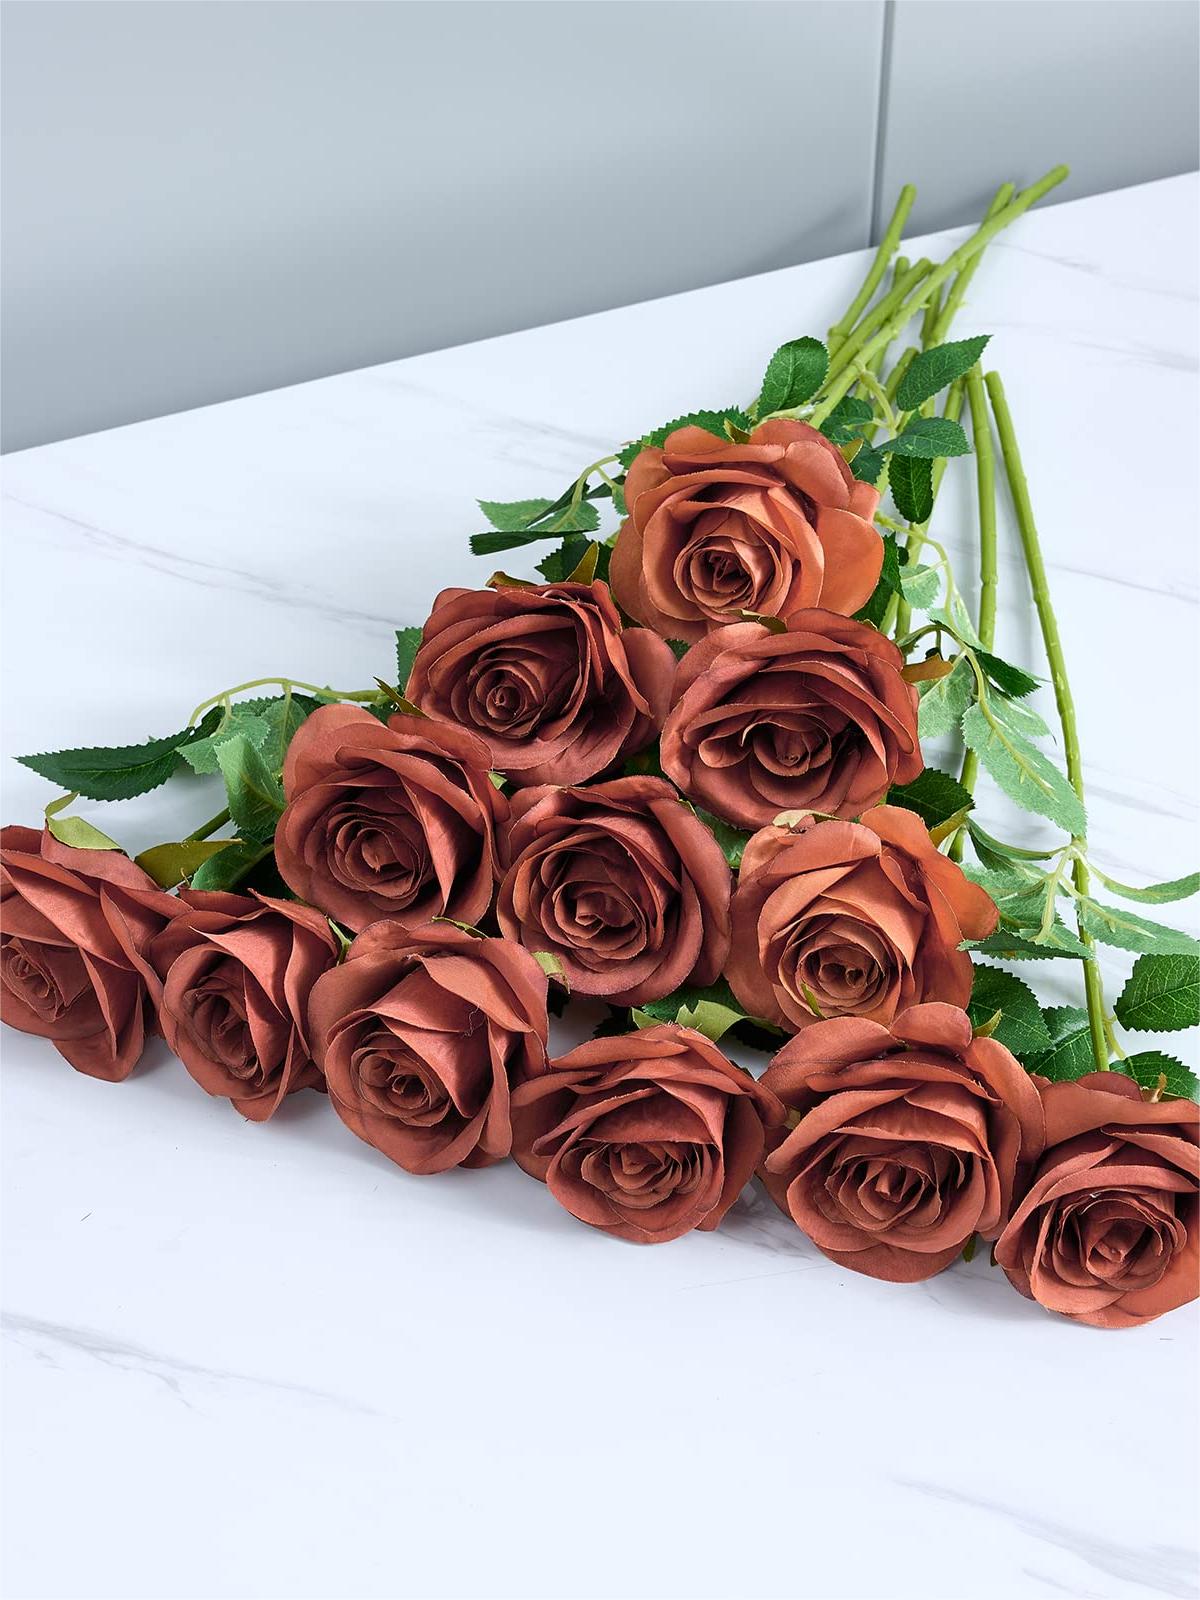 Coffee Artificial Rose Flowers With Long Stems Wedding Bouquet Centerpieces Decorations HH8048